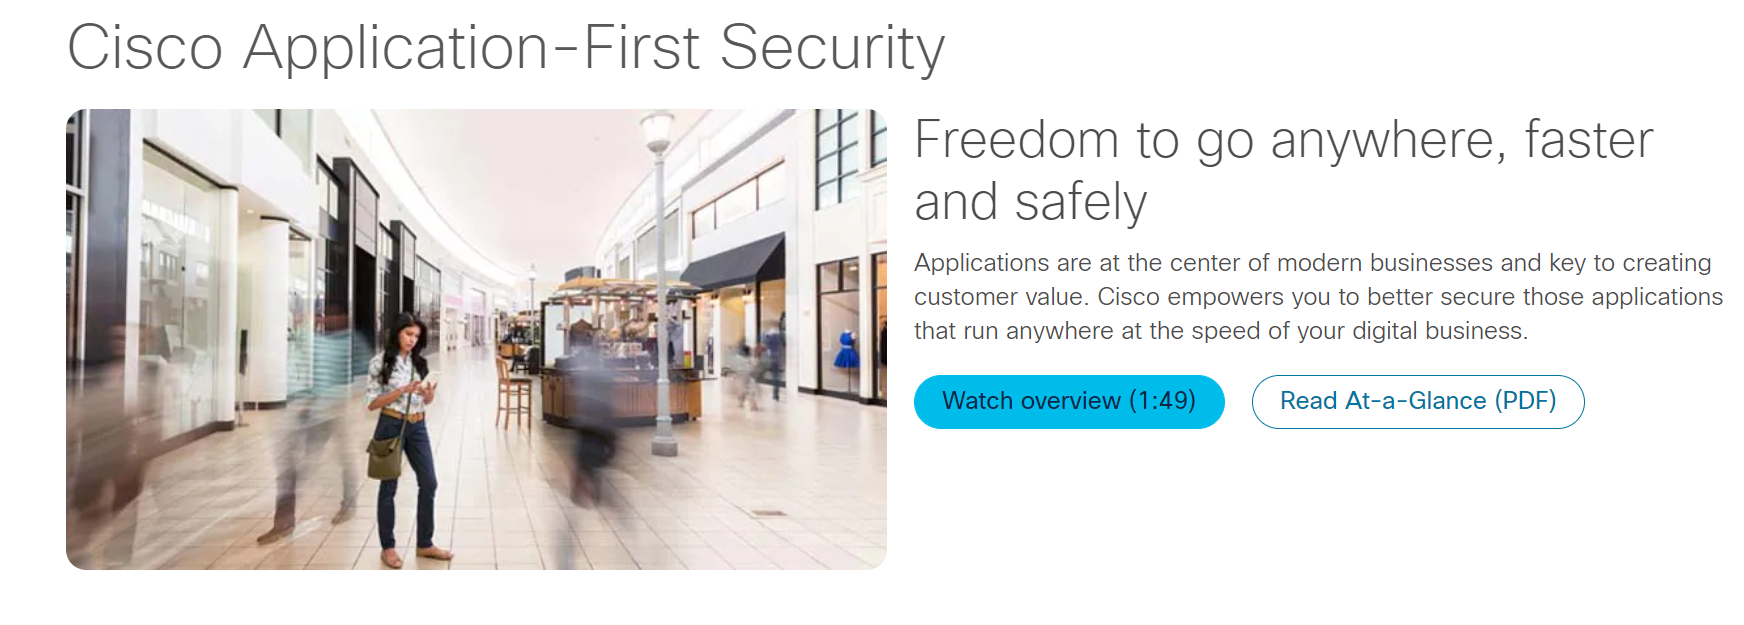 Cisco cybersecurity software for business